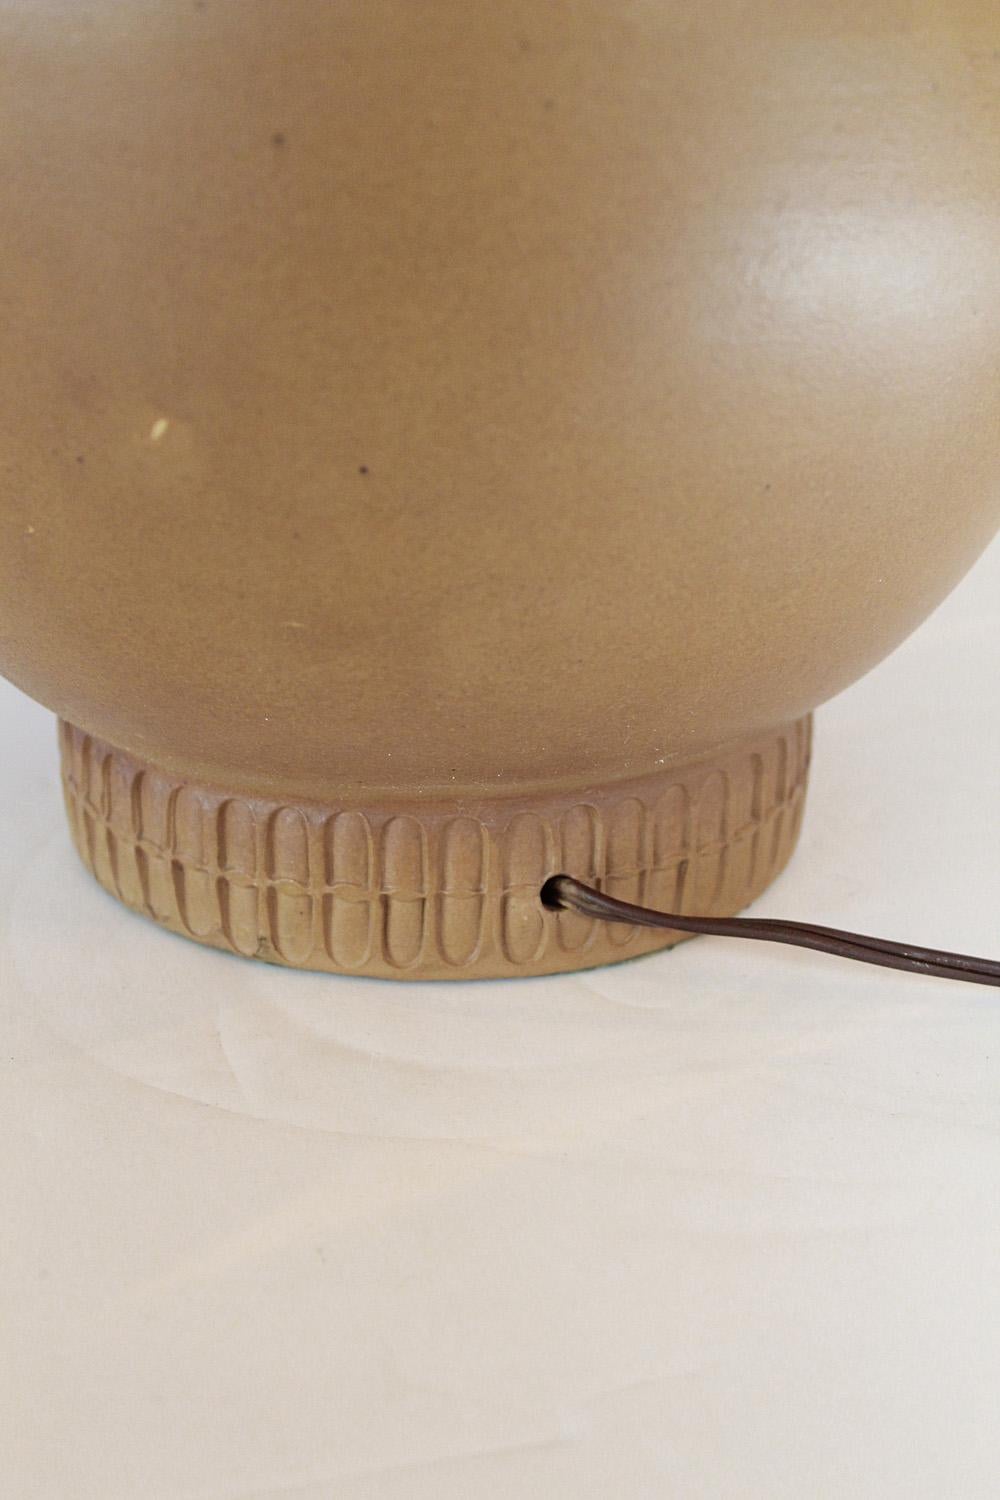 Large Yellow, Rust, and Brown Bitossi Ceramic Lamp, 1960s Italy For Sale 1